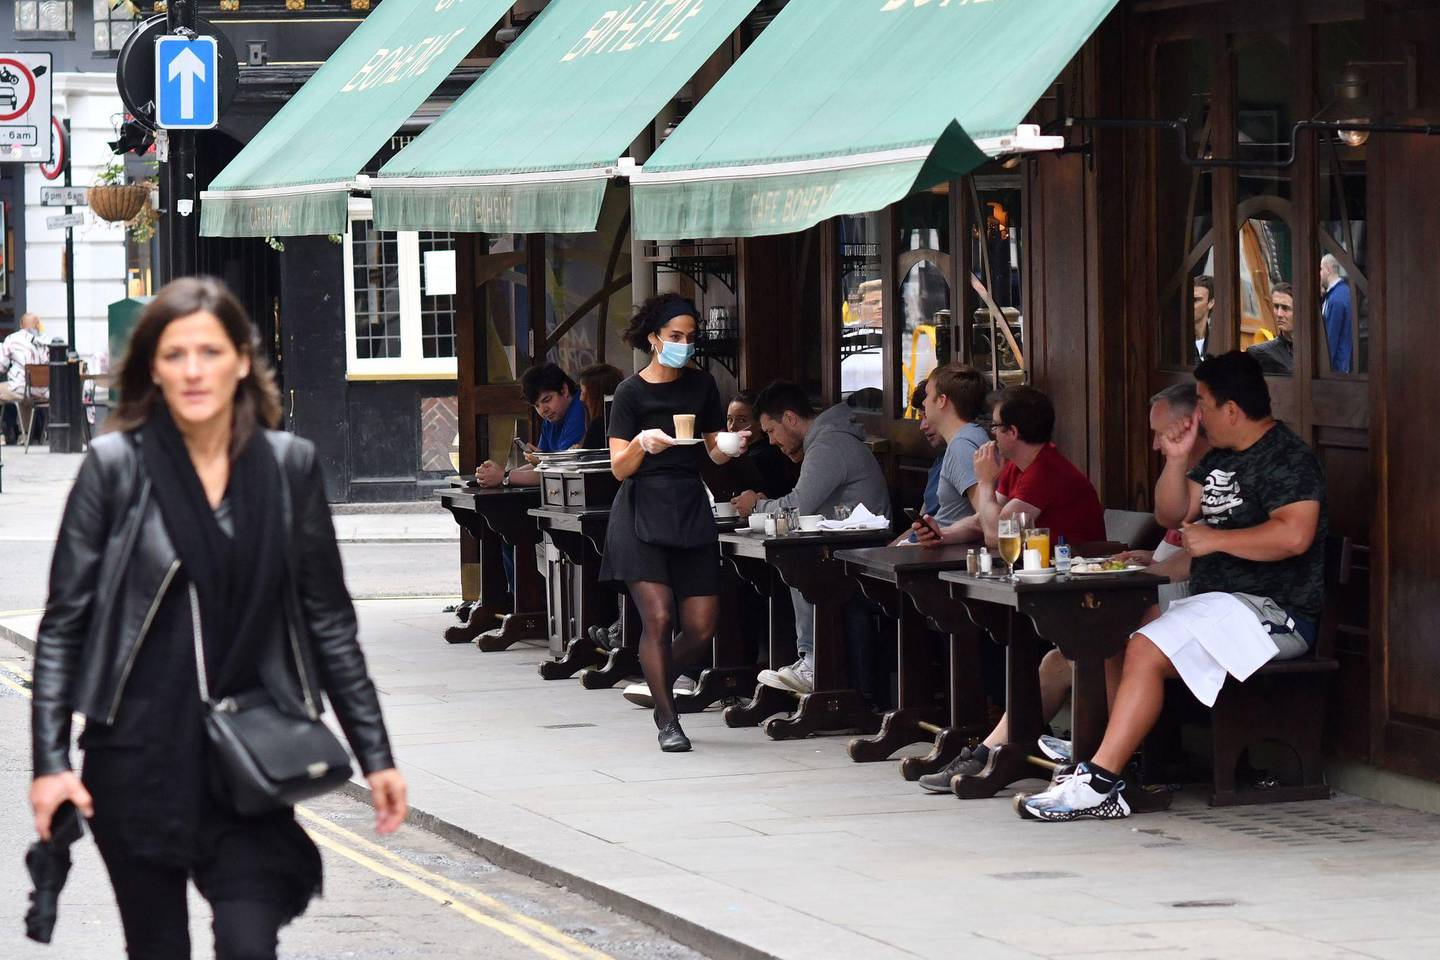 A member of staff wearing a protective face covering serves customers at an outside table at Cafe Boheme in Soho in London on July 4, 2020, as the Soho area embraces pedestrianisation in line with an easing of restrictions during the novel coronavirus COVID-19 pandemic. - Pubs in England reopen on Saturday for the first time since late March, bringing cheer to drinkers and the industry but fears of public disorder and fresh coronavirus cases. (Photo by JUSTIN TALLIS / AFP)